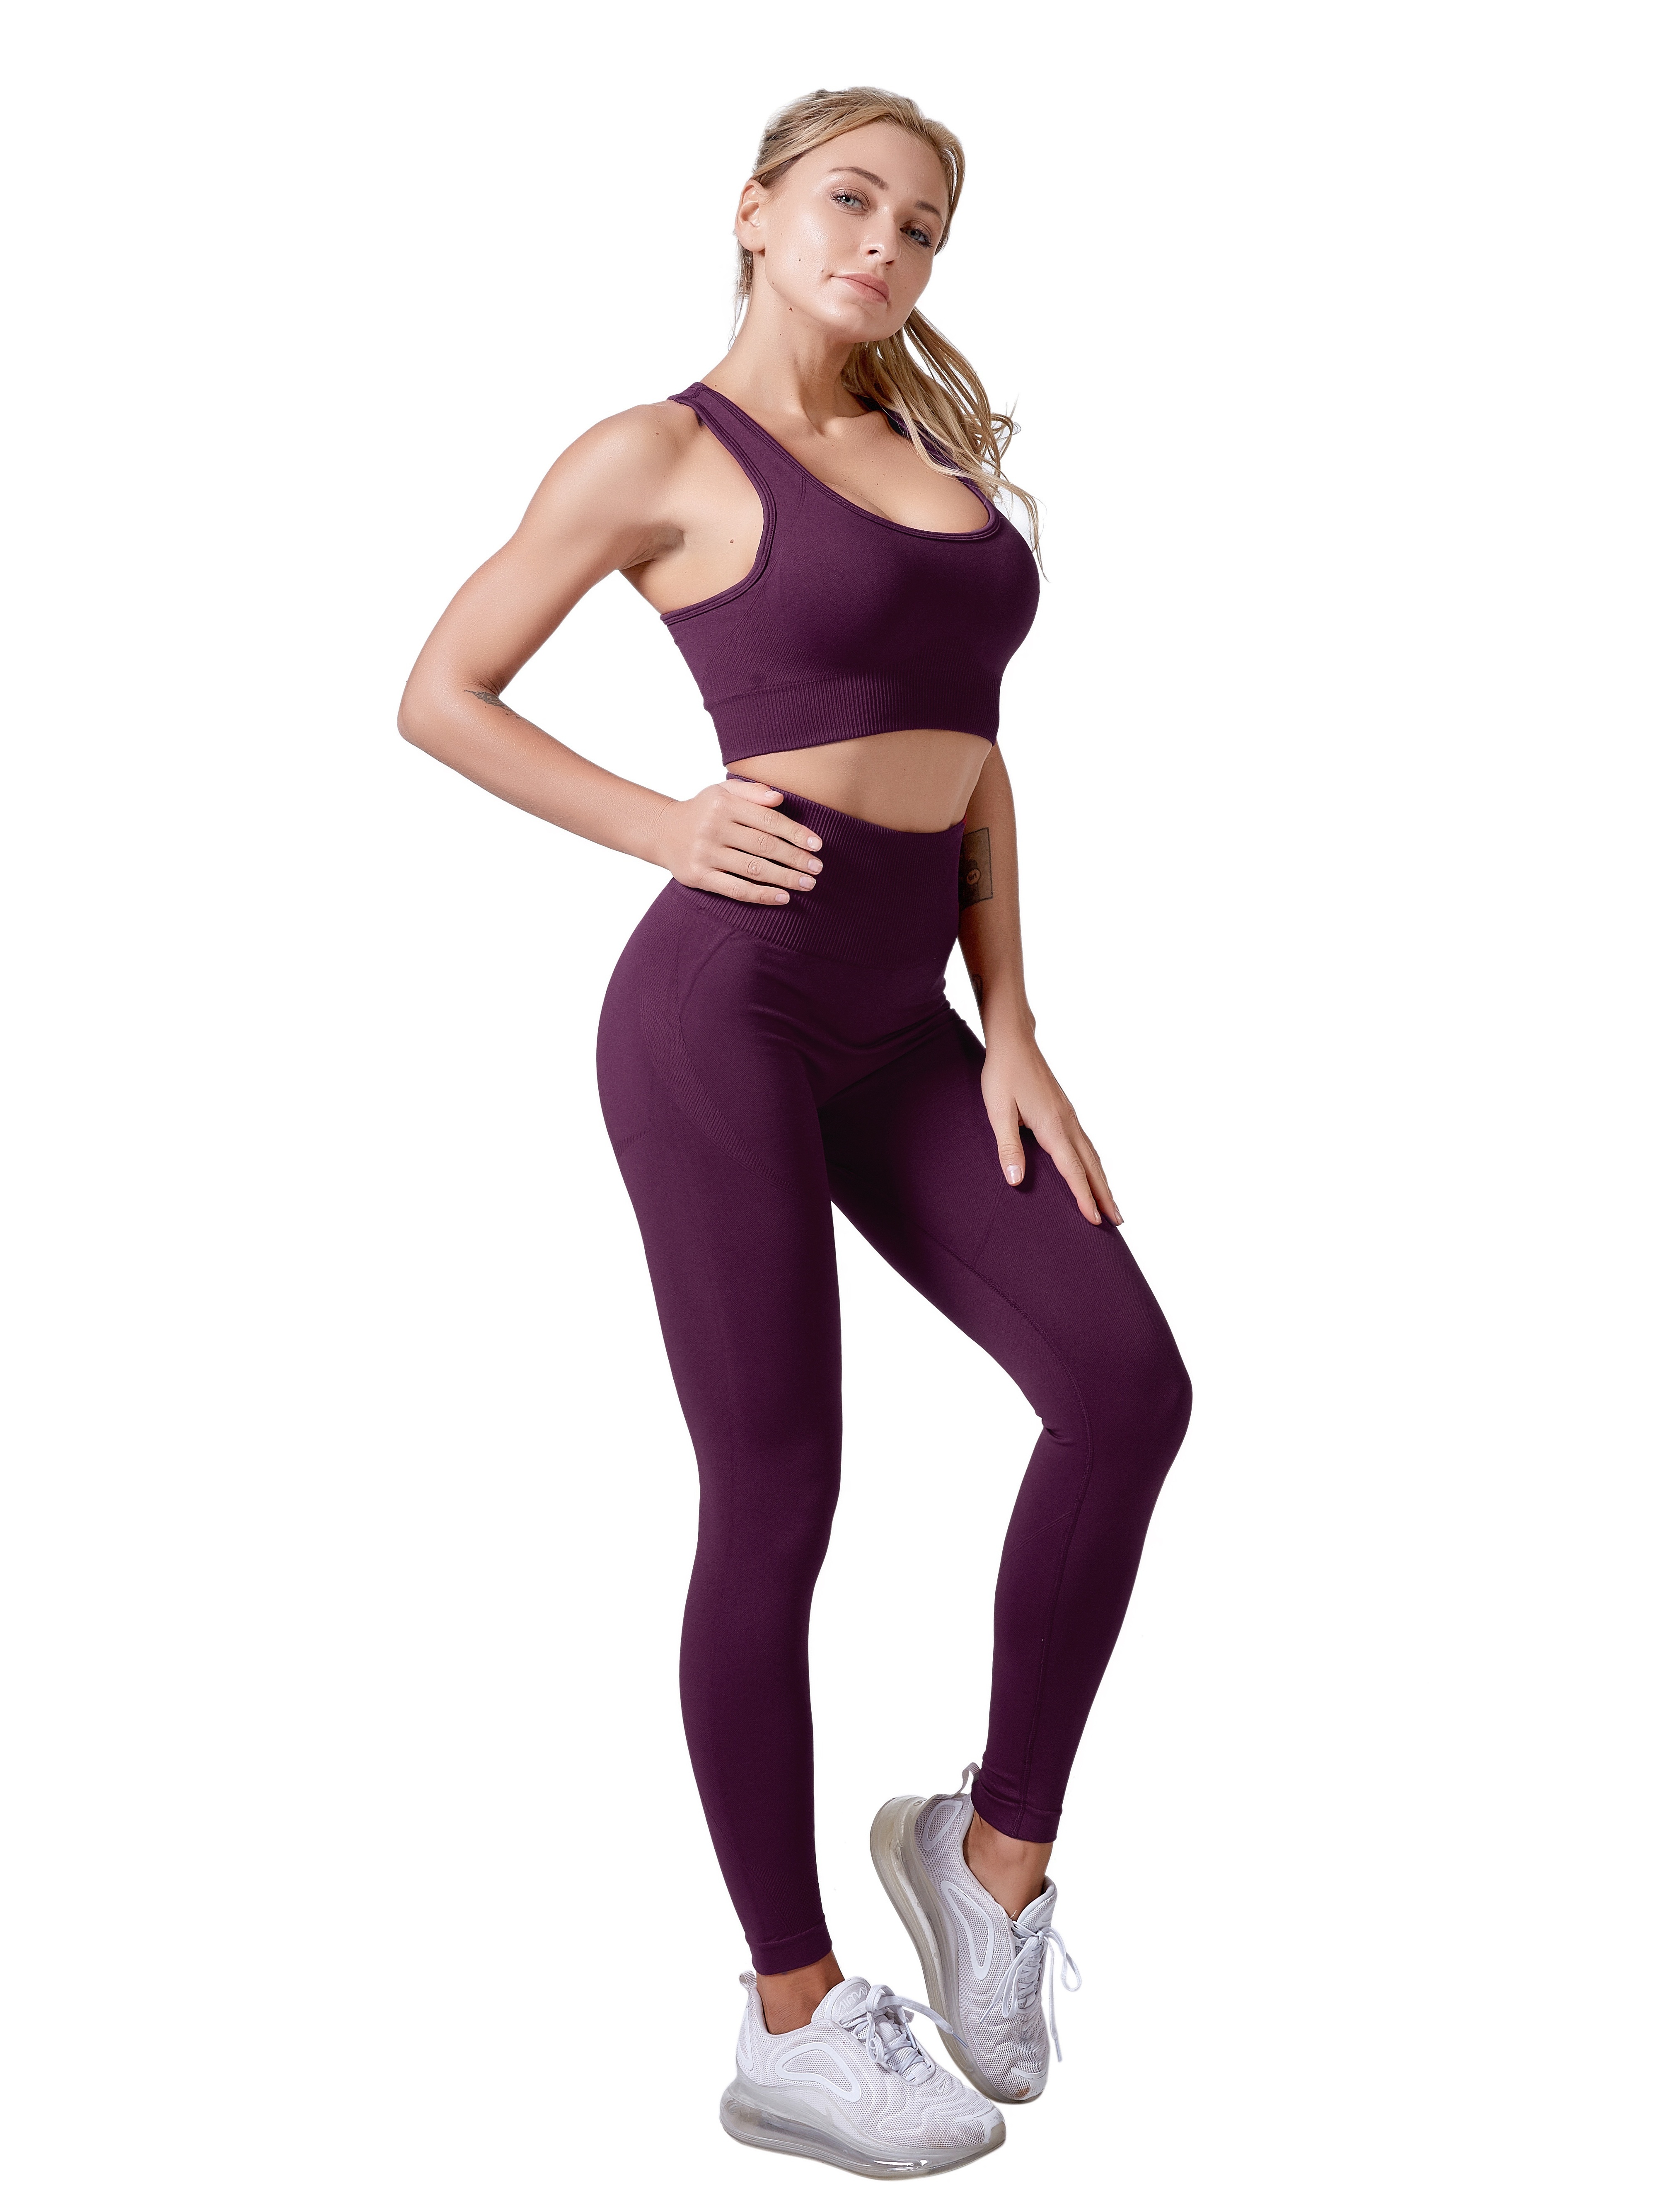 Yoga Basic 2pcs Seamless Fitness Yoga Suit Gym Outfits Set Short Sleeve Top  Wide Waistband Tights